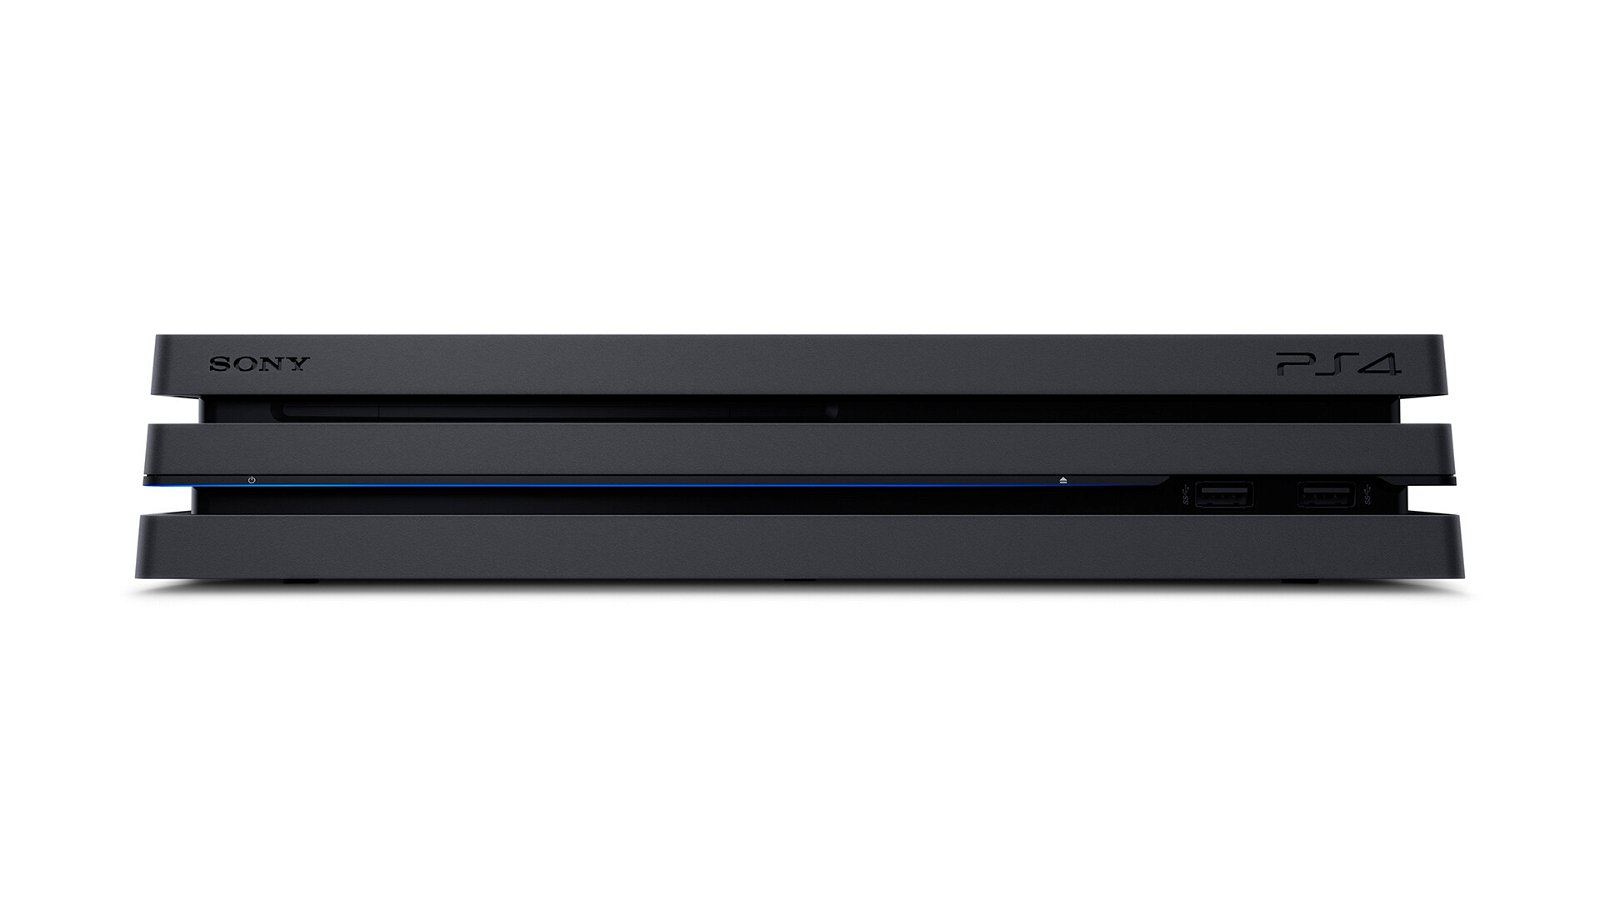 Sony Launches In-Depth PlayStation 4 Pro FAQ 2